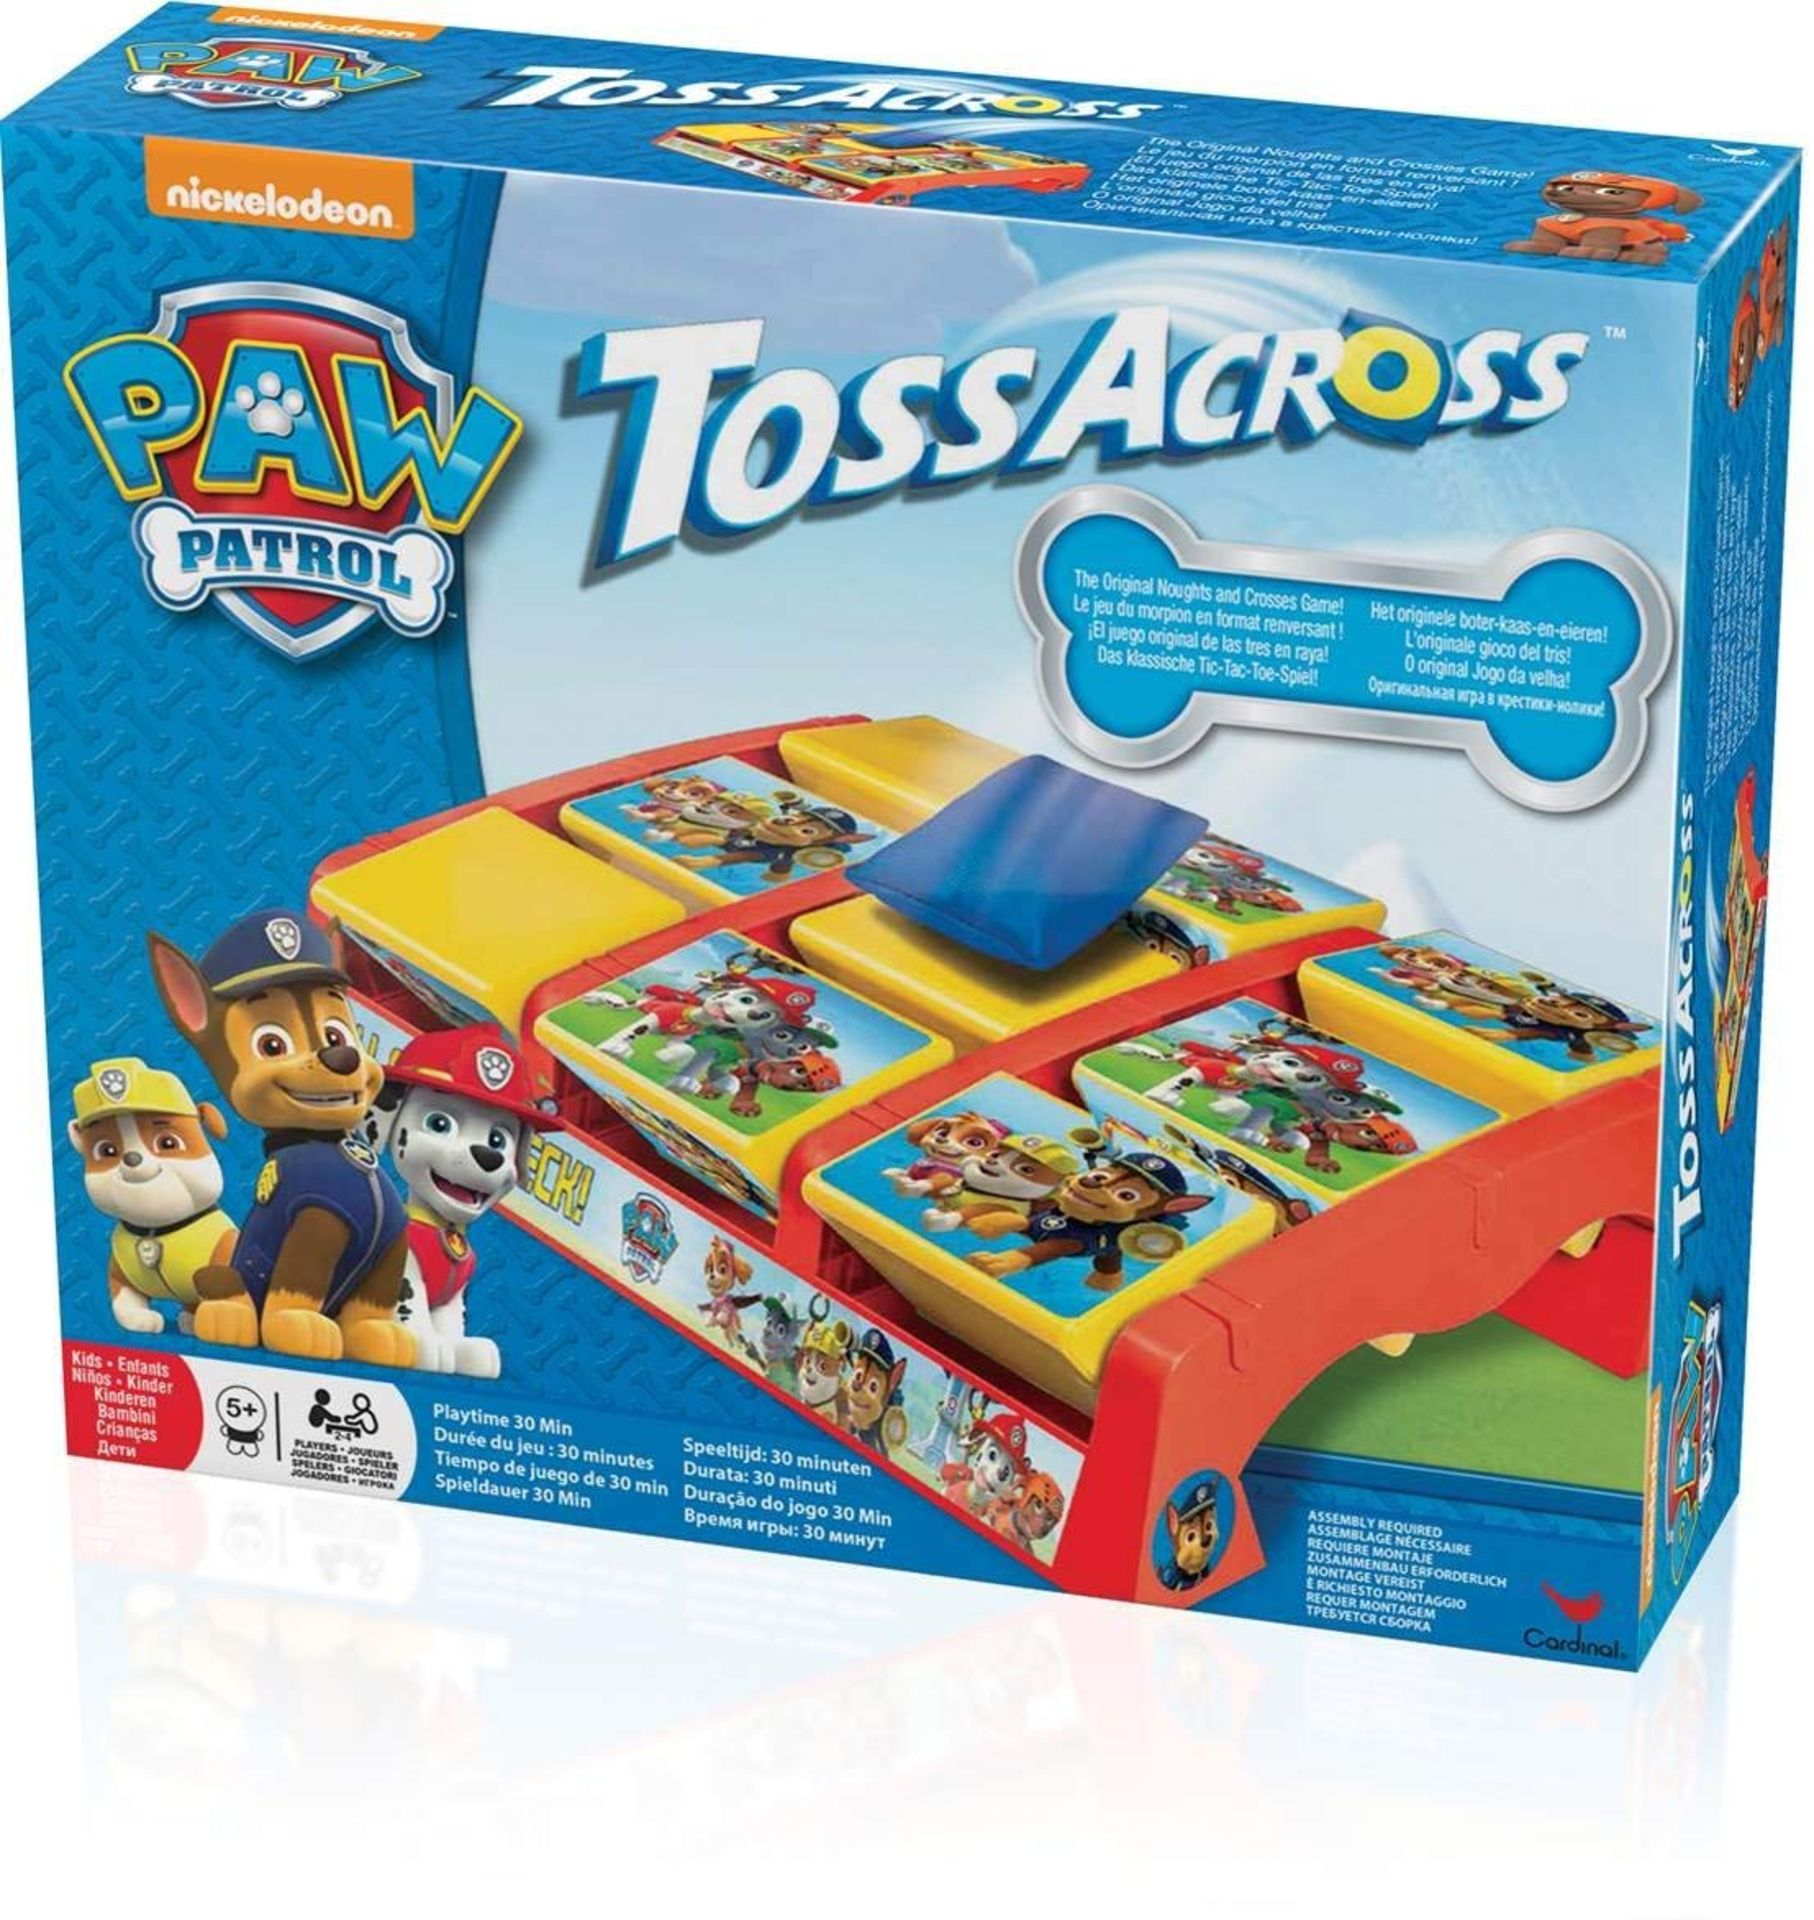 120 x Paw Patrol Table Top TossAross Game (6028795) | @ RRP £8.88 | Total: £1,065.6